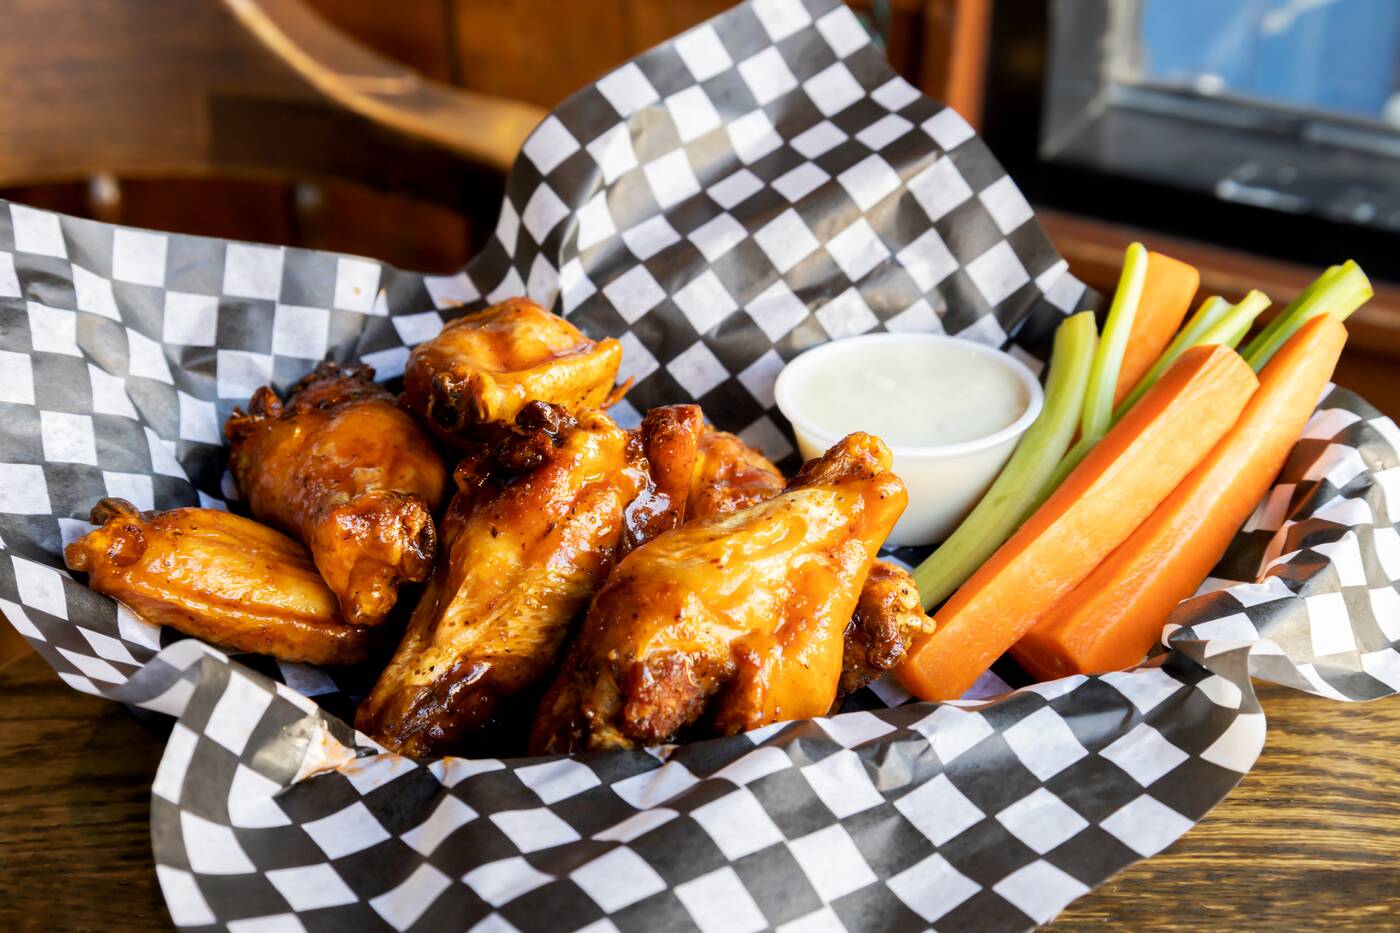 This Toronto sports bar has been known for their chicken wings since 1985